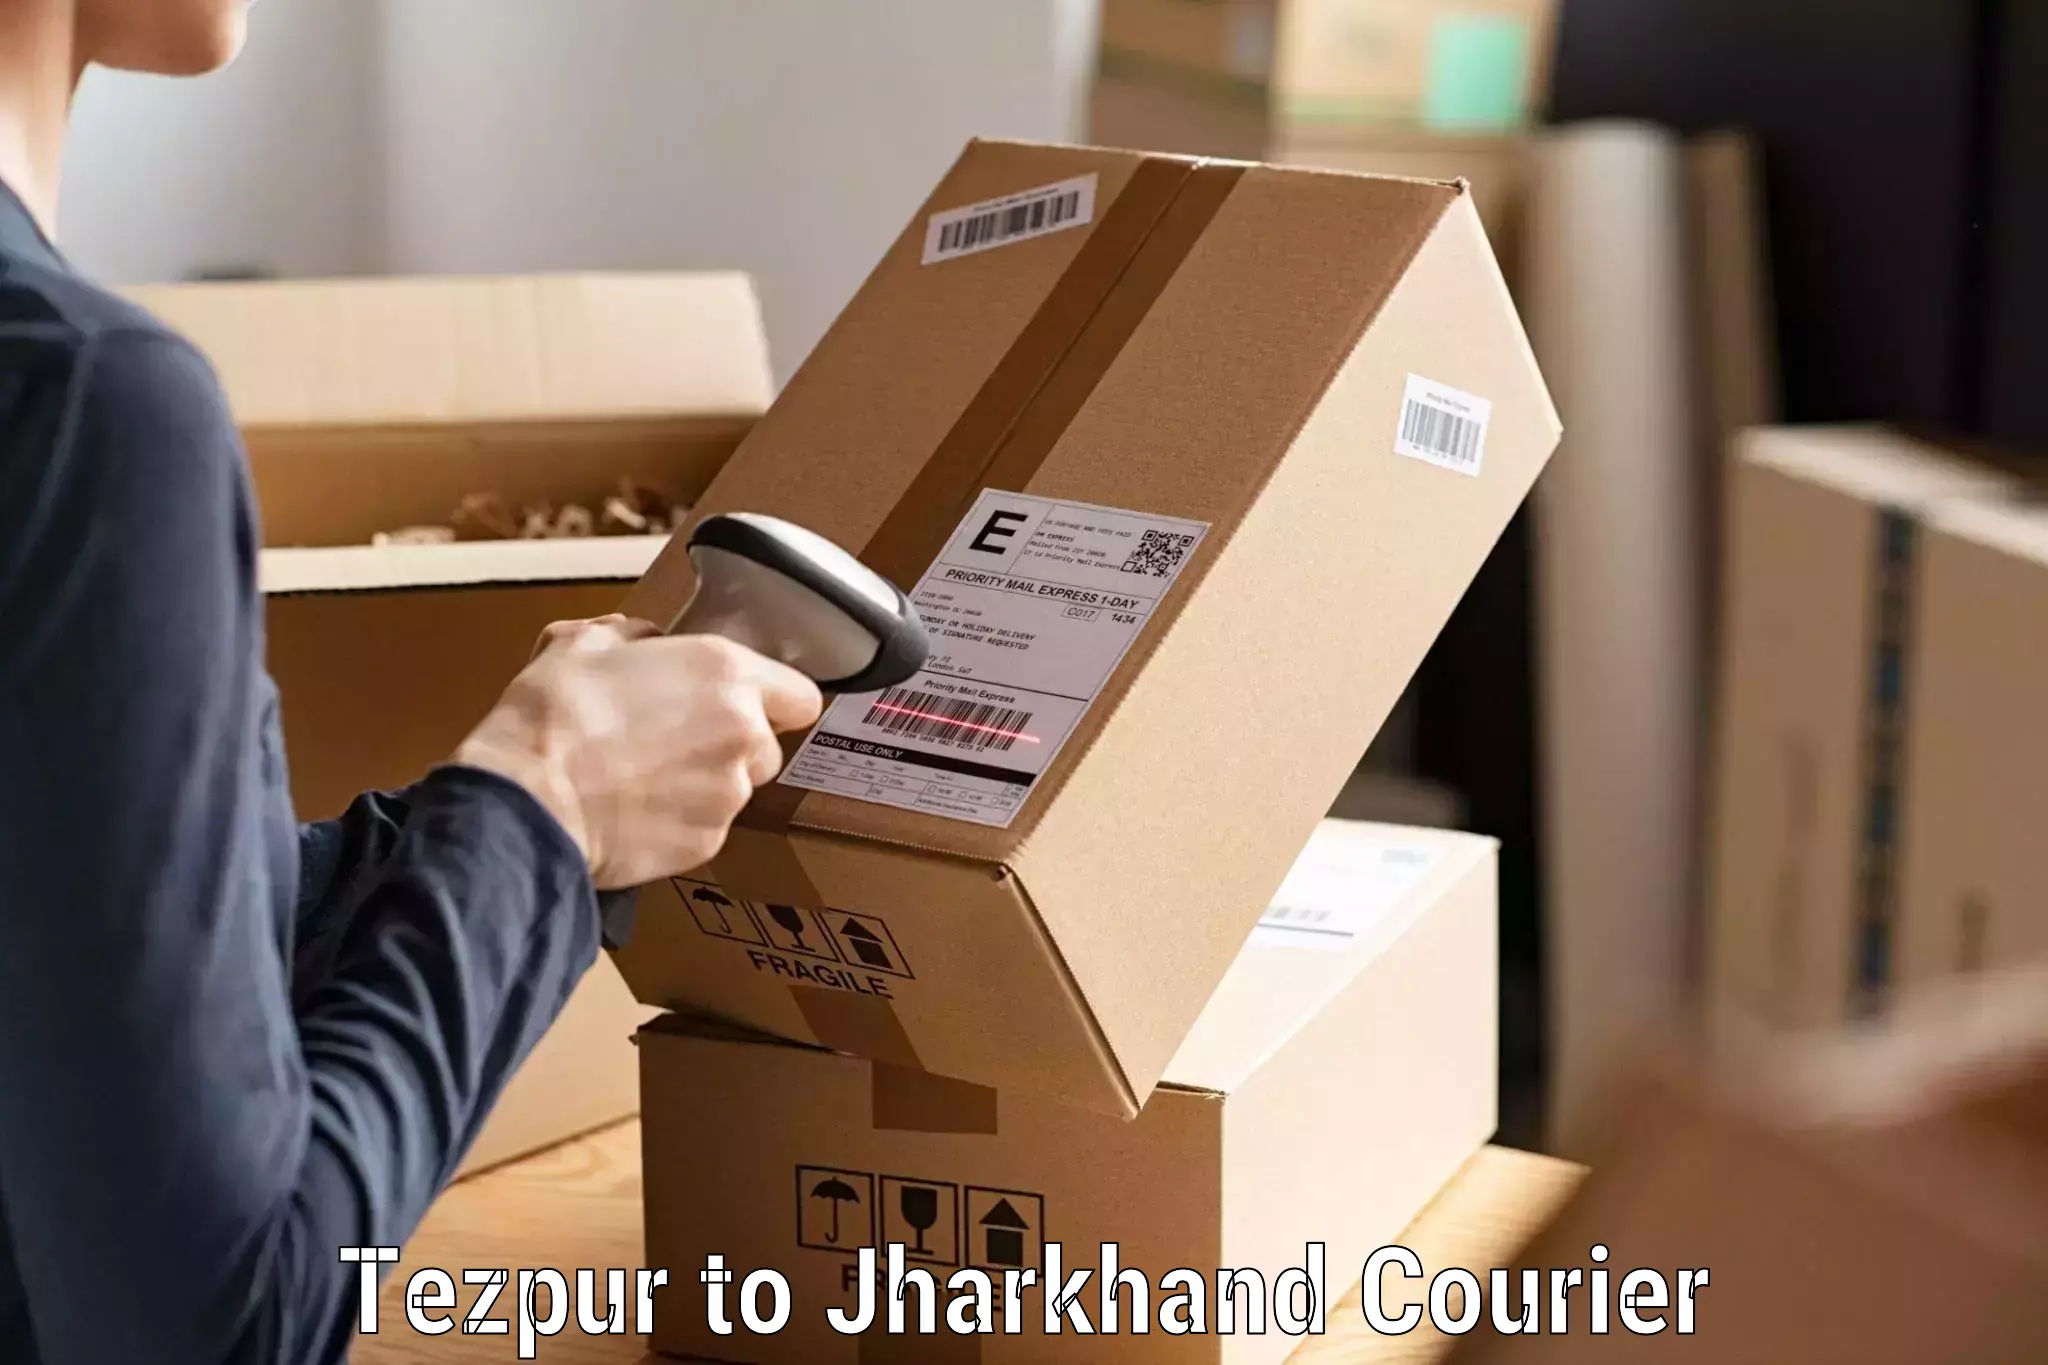 Corporate courier solutions Tezpur to Godabar Chatra